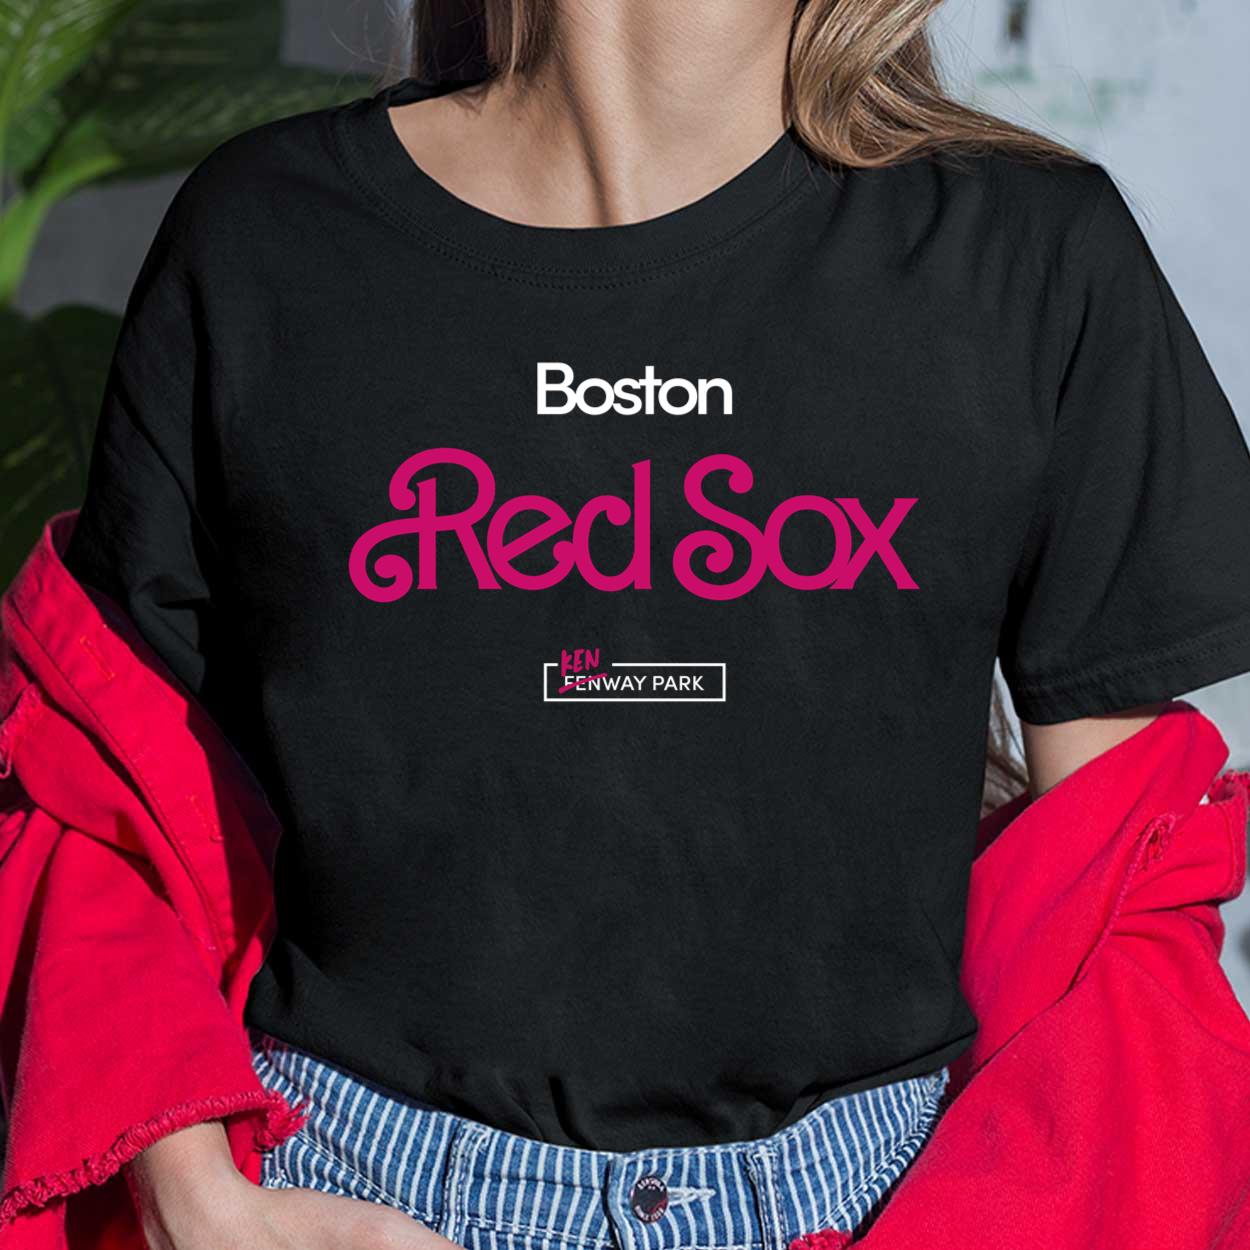 boston red sox team store fenway park, Off 65%